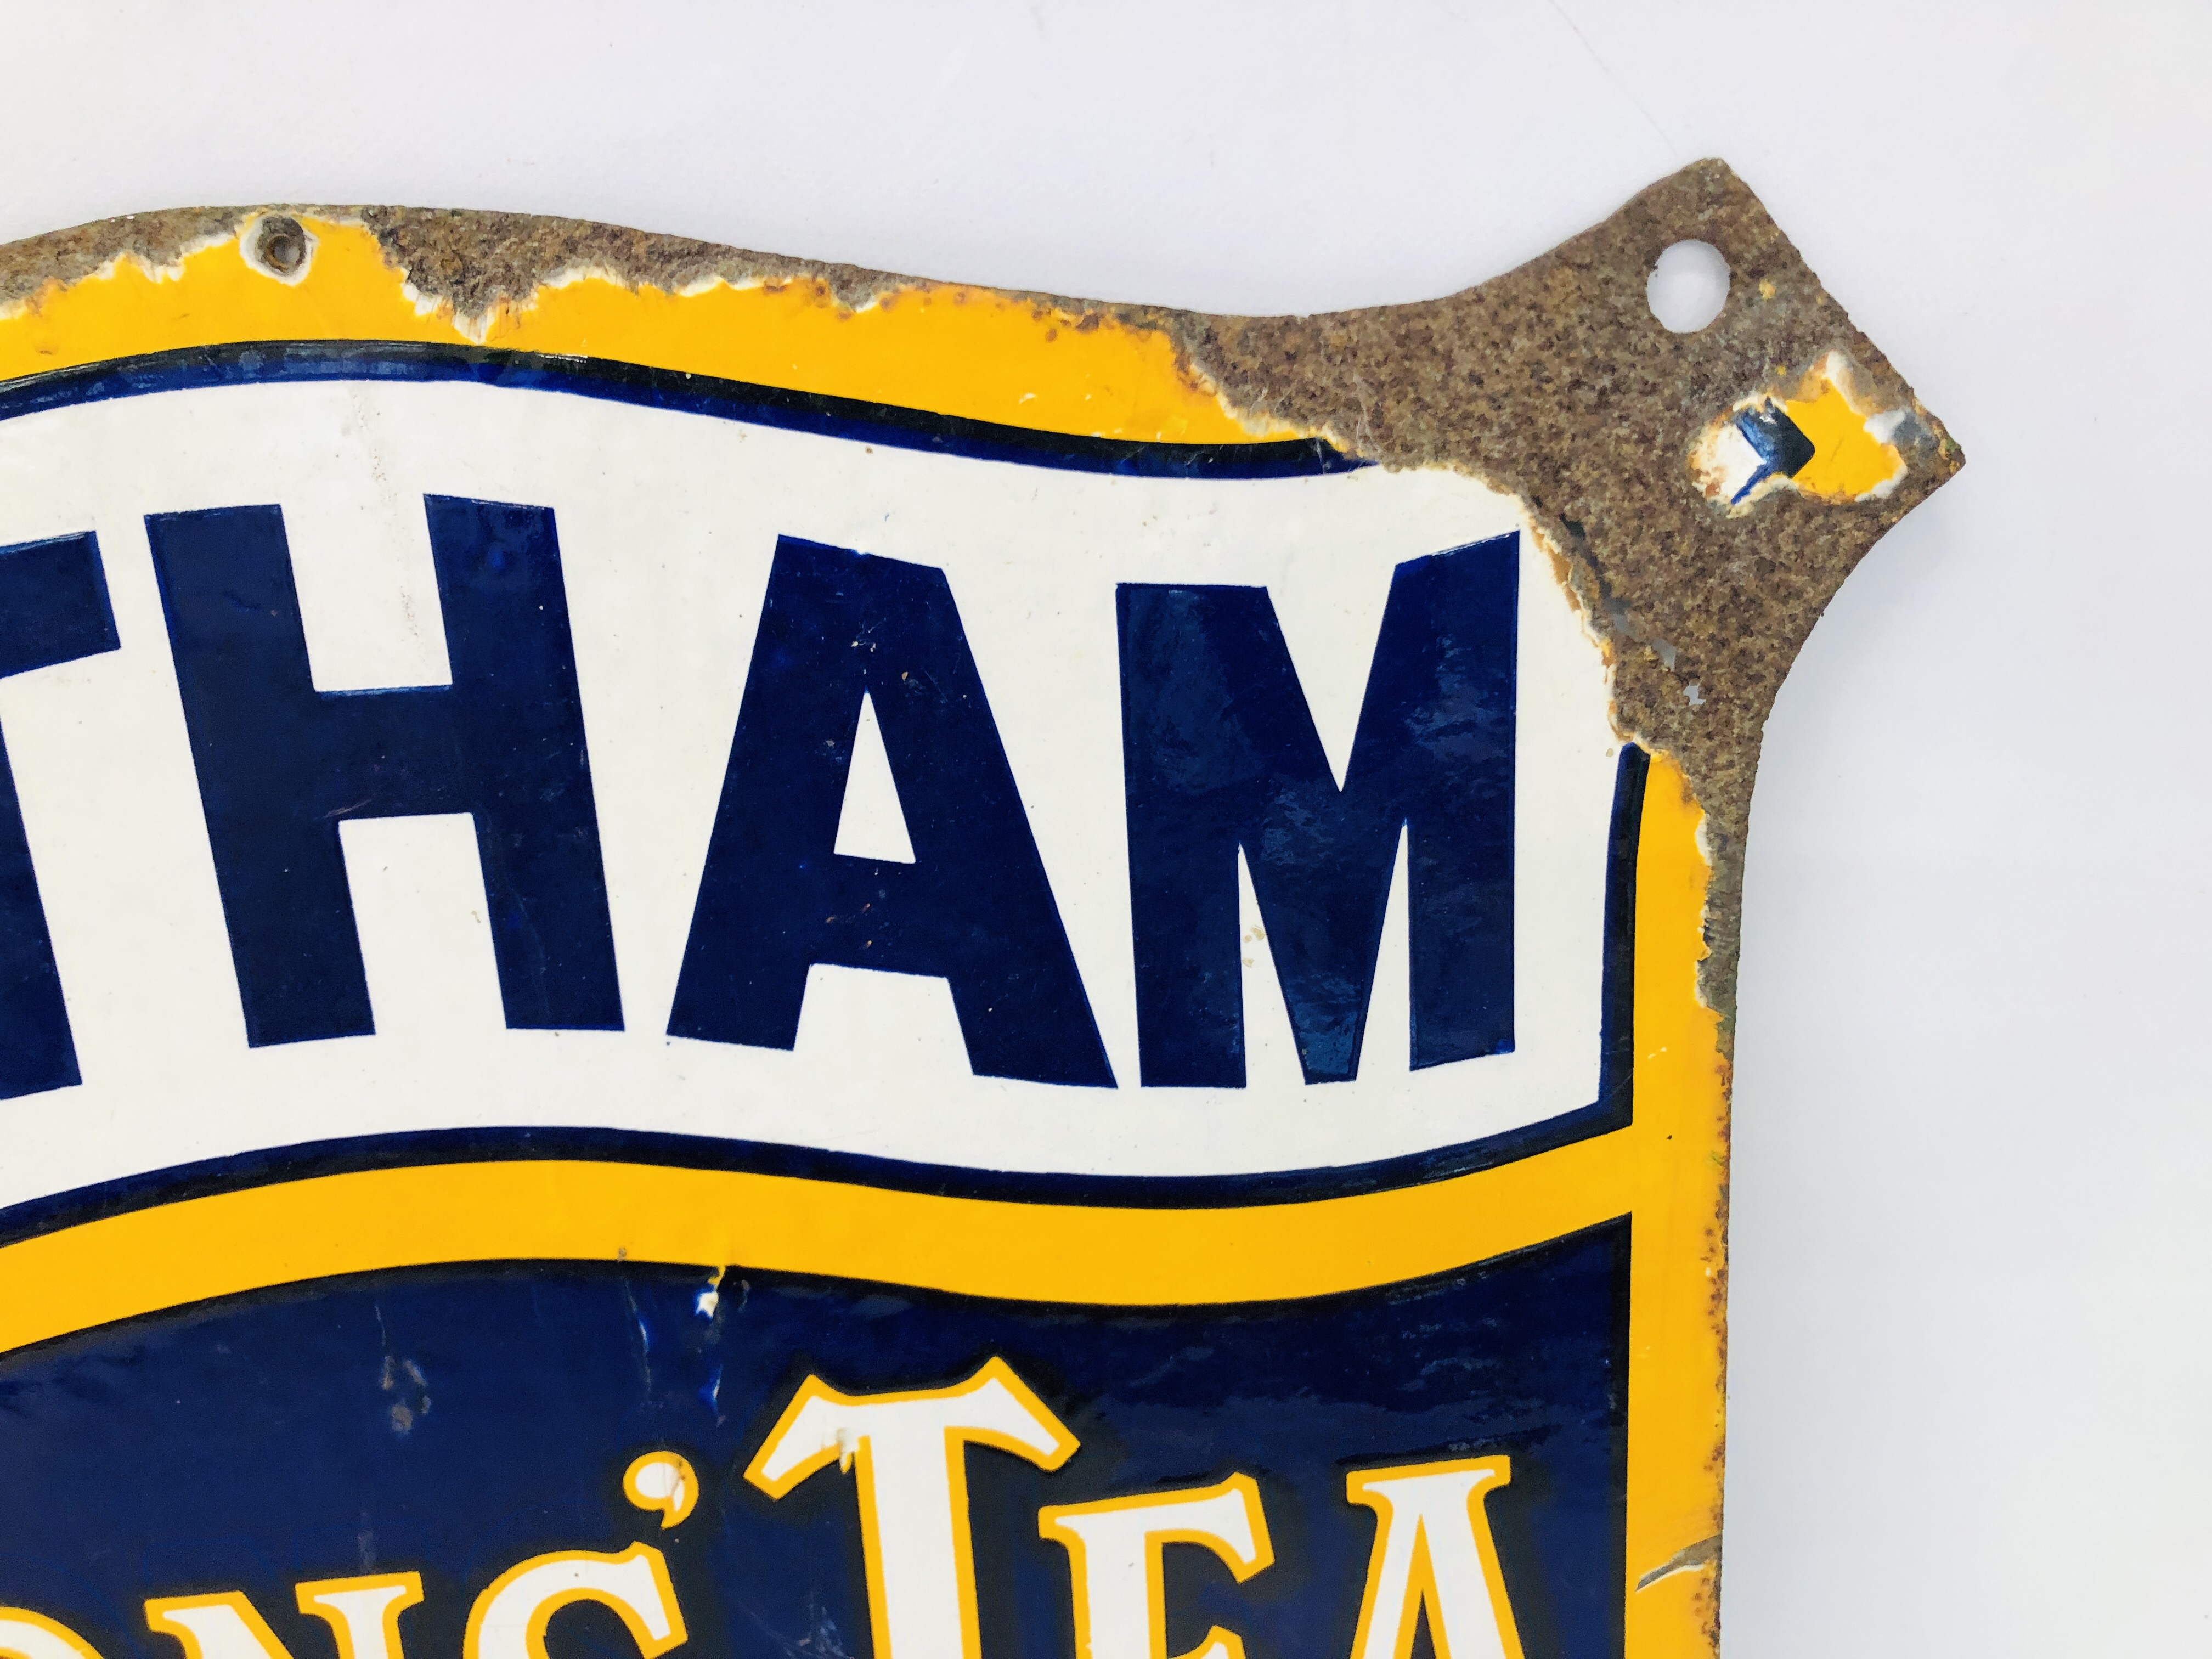 A VINTAGE "WITHAM LYONS' TEA SOLD HERE" ENAMEL ADVERTISING SIGN - W 56CM. H 46CM. - Image 3 of 6